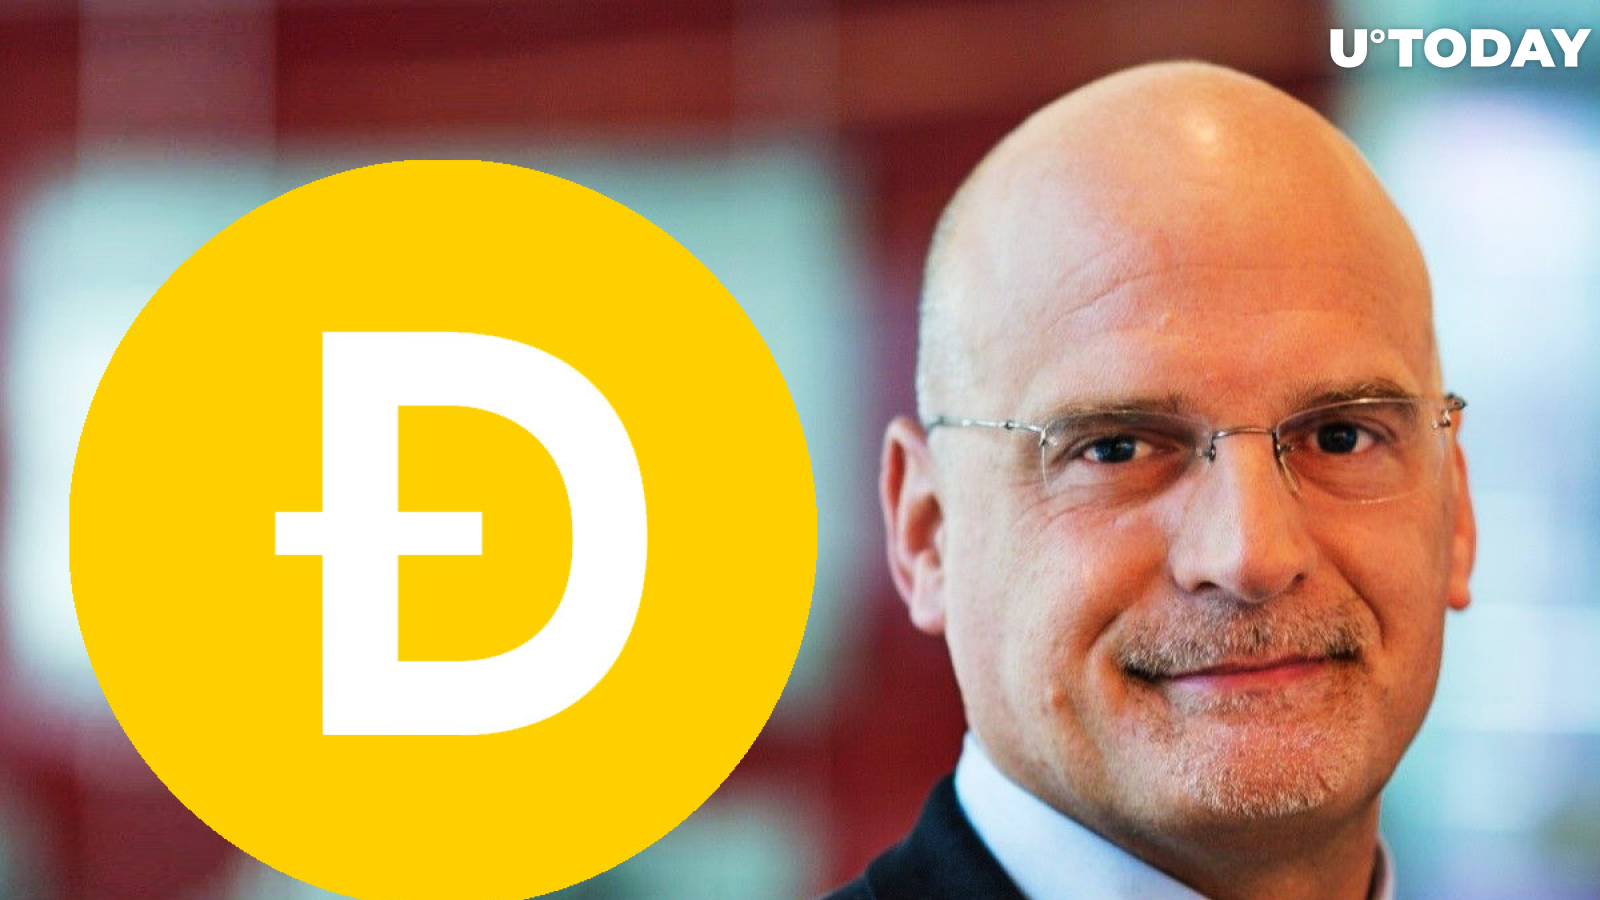 Dogecoin Is Bumping Against Real Resistance but We See Limited Potential for DOGE: Bloomberg’s Chief Strategist